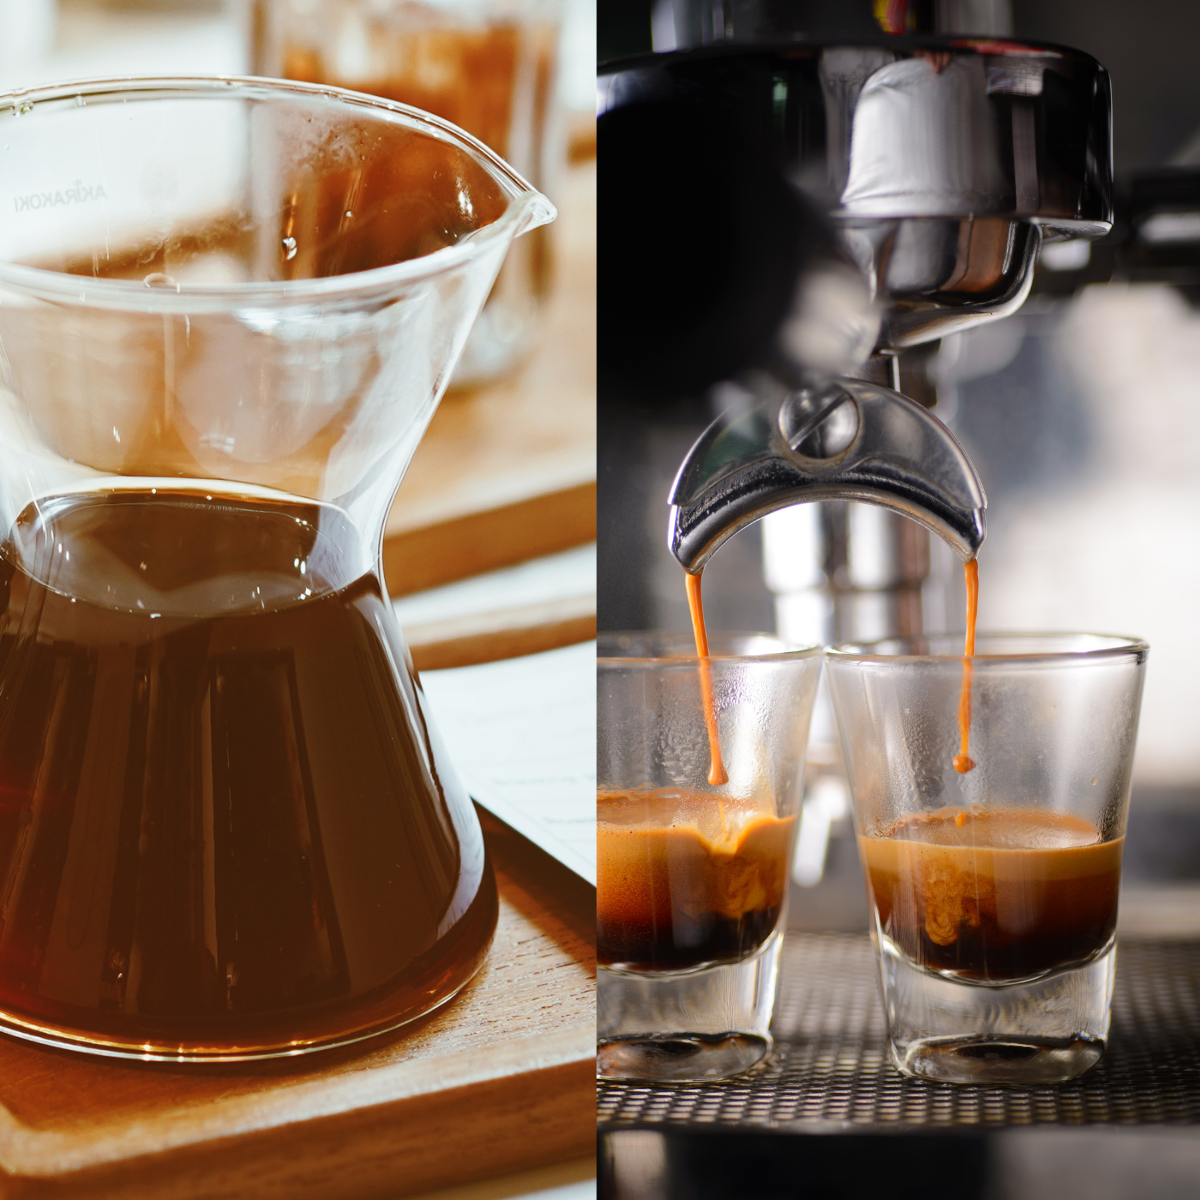 On the right, a pour-over coffee setup; on the left, espresso being brewed. Consistency makes all the difference!